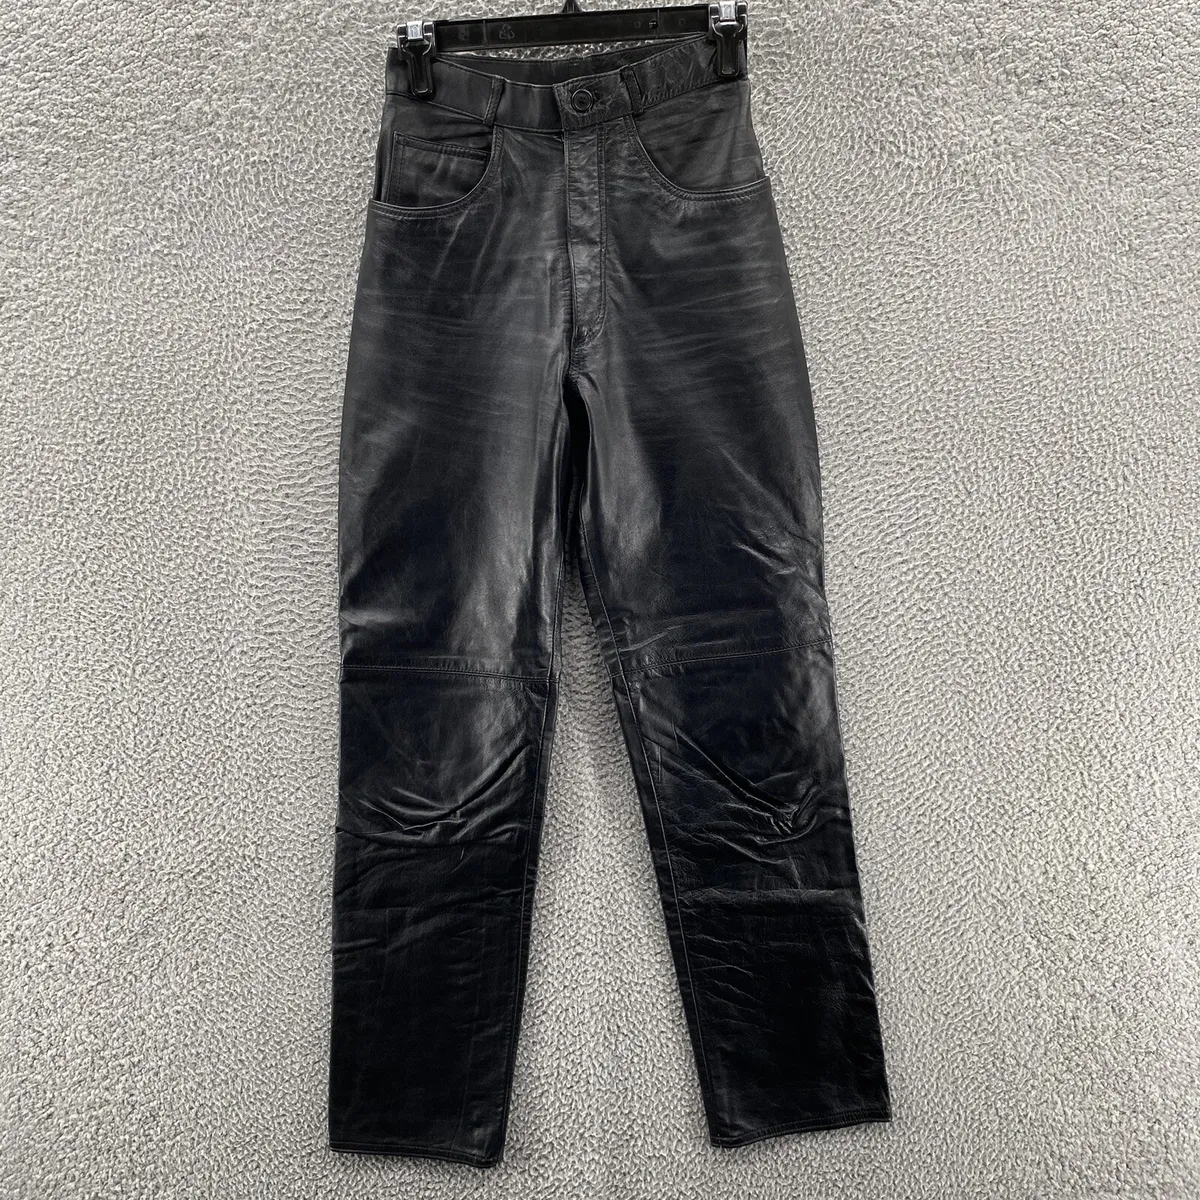 VINTAGE G-III Pants Womens 7 24x30 Genuine Leather 80s 90s Relaxed Tapered  Black